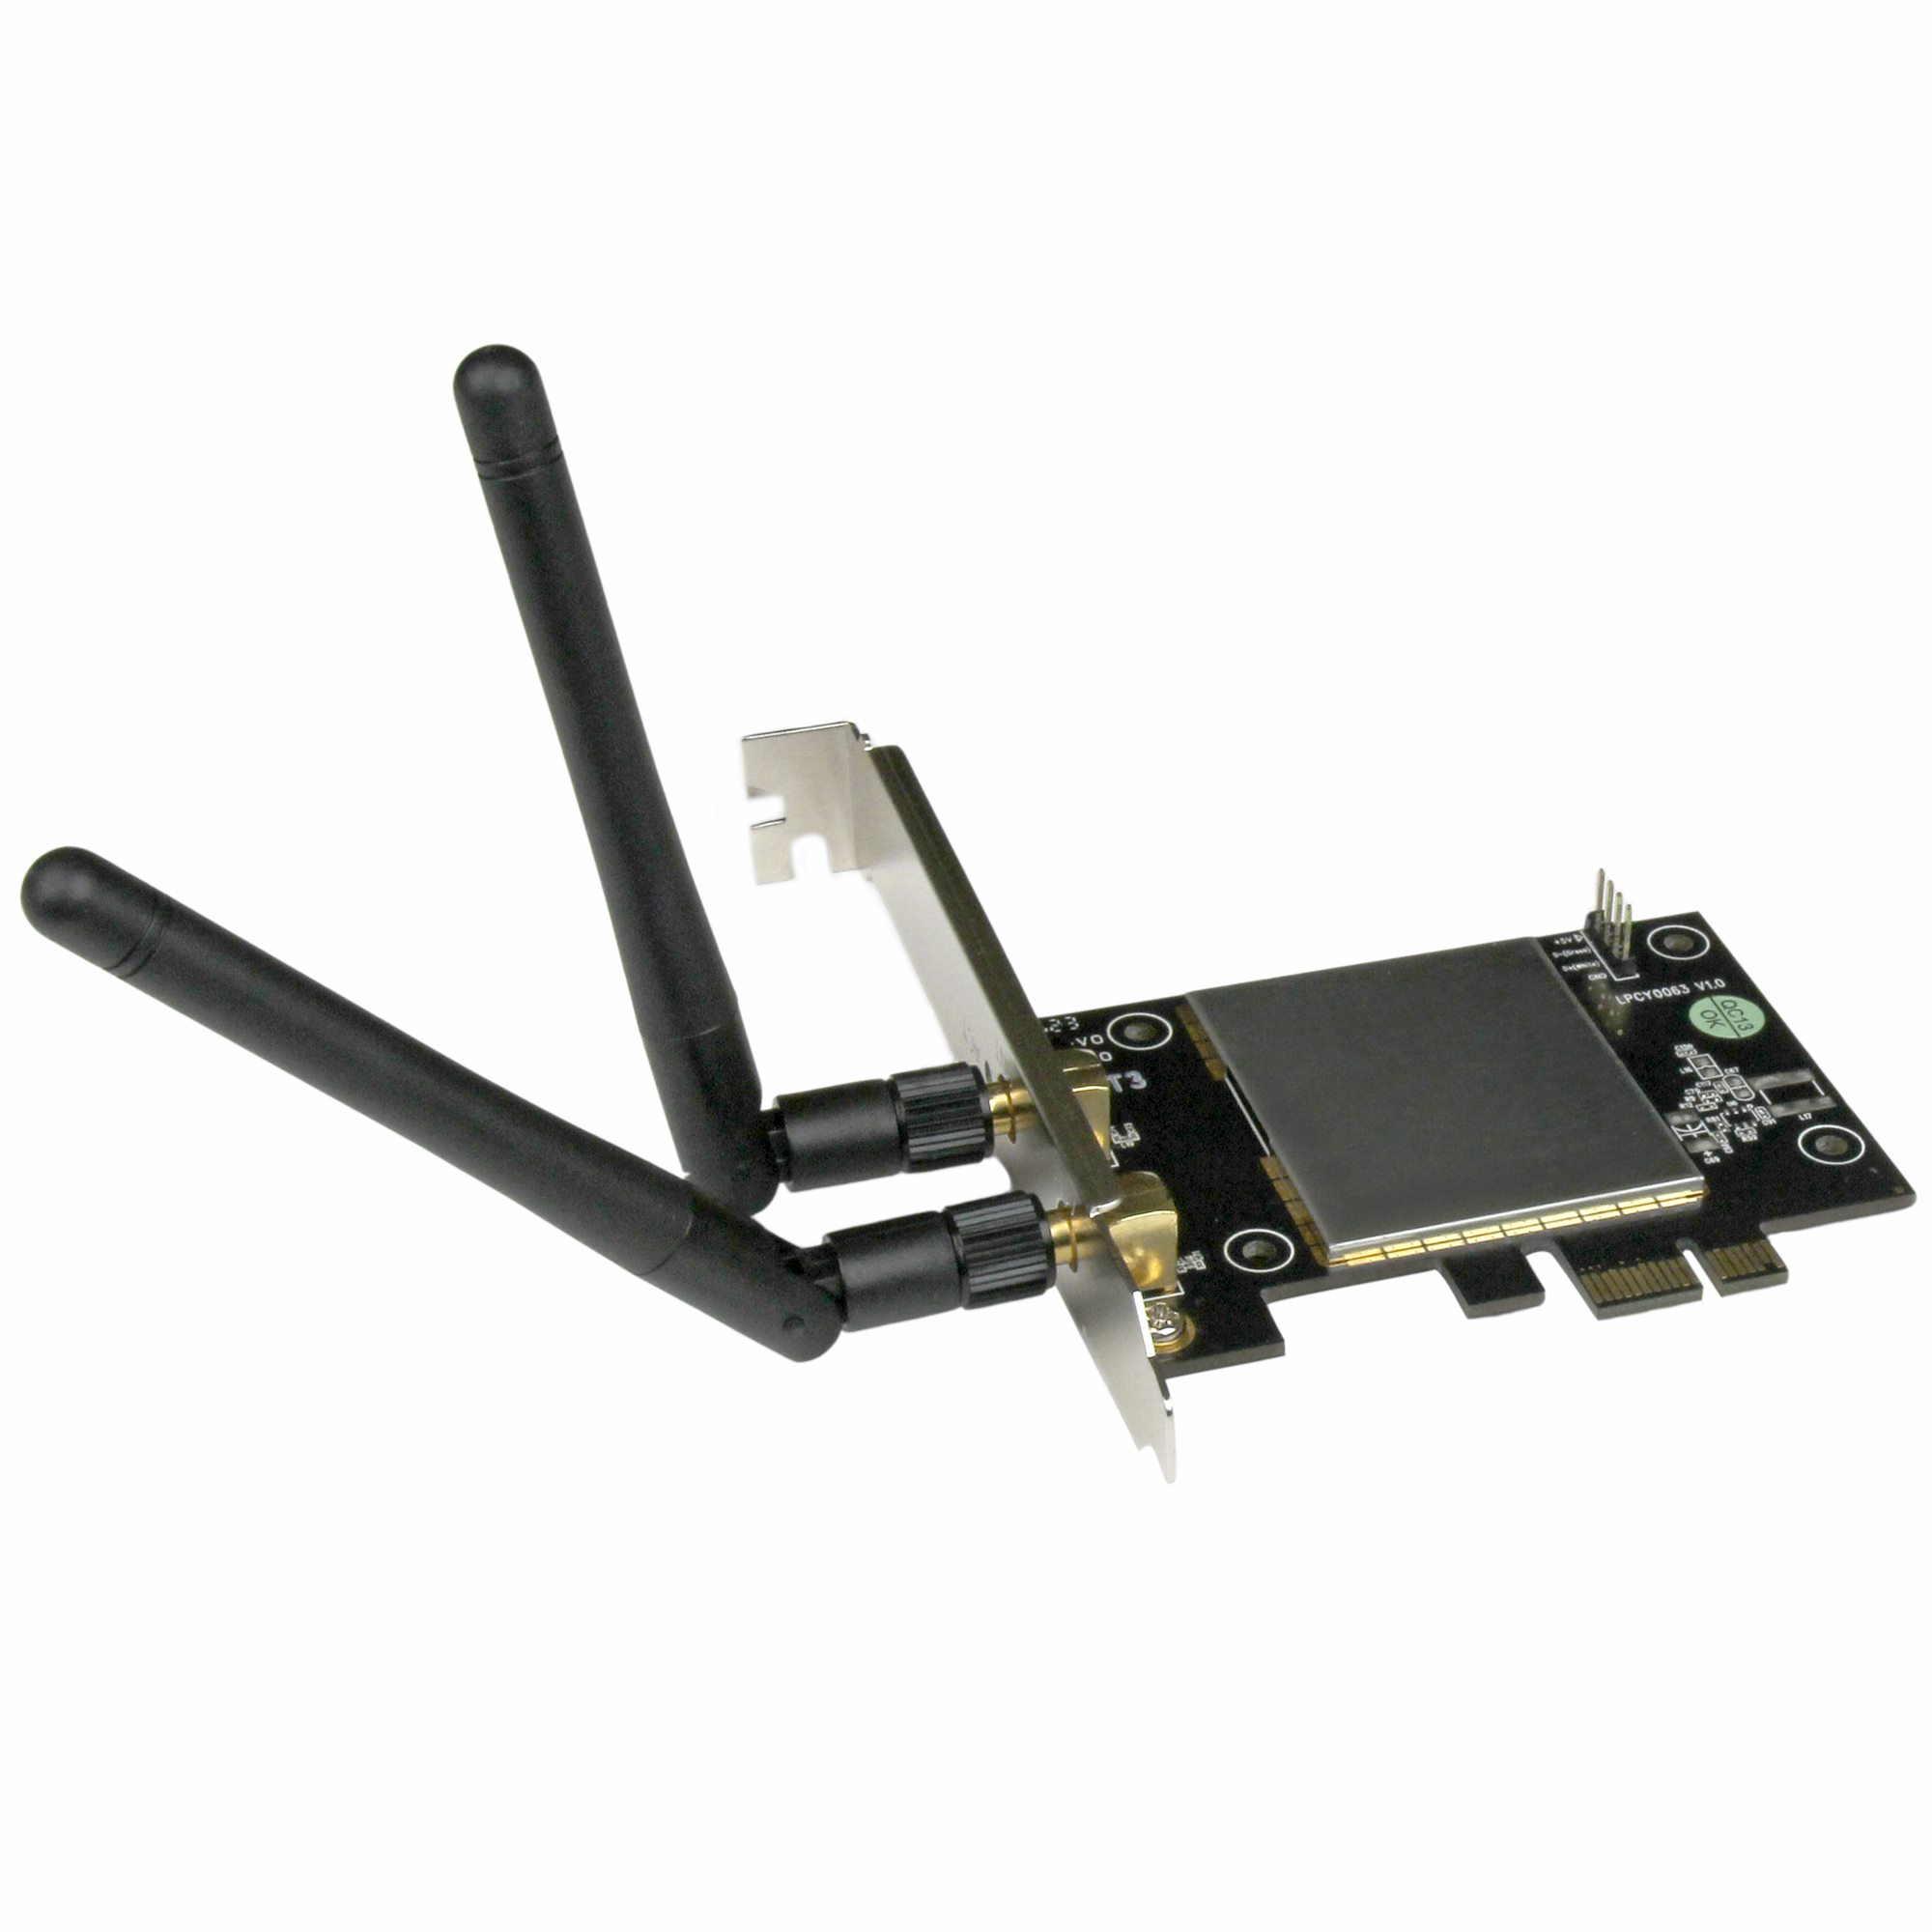 PCIe AC1200 Wireless Network Adapter - Wireless Network Adapters, Networking IO Products